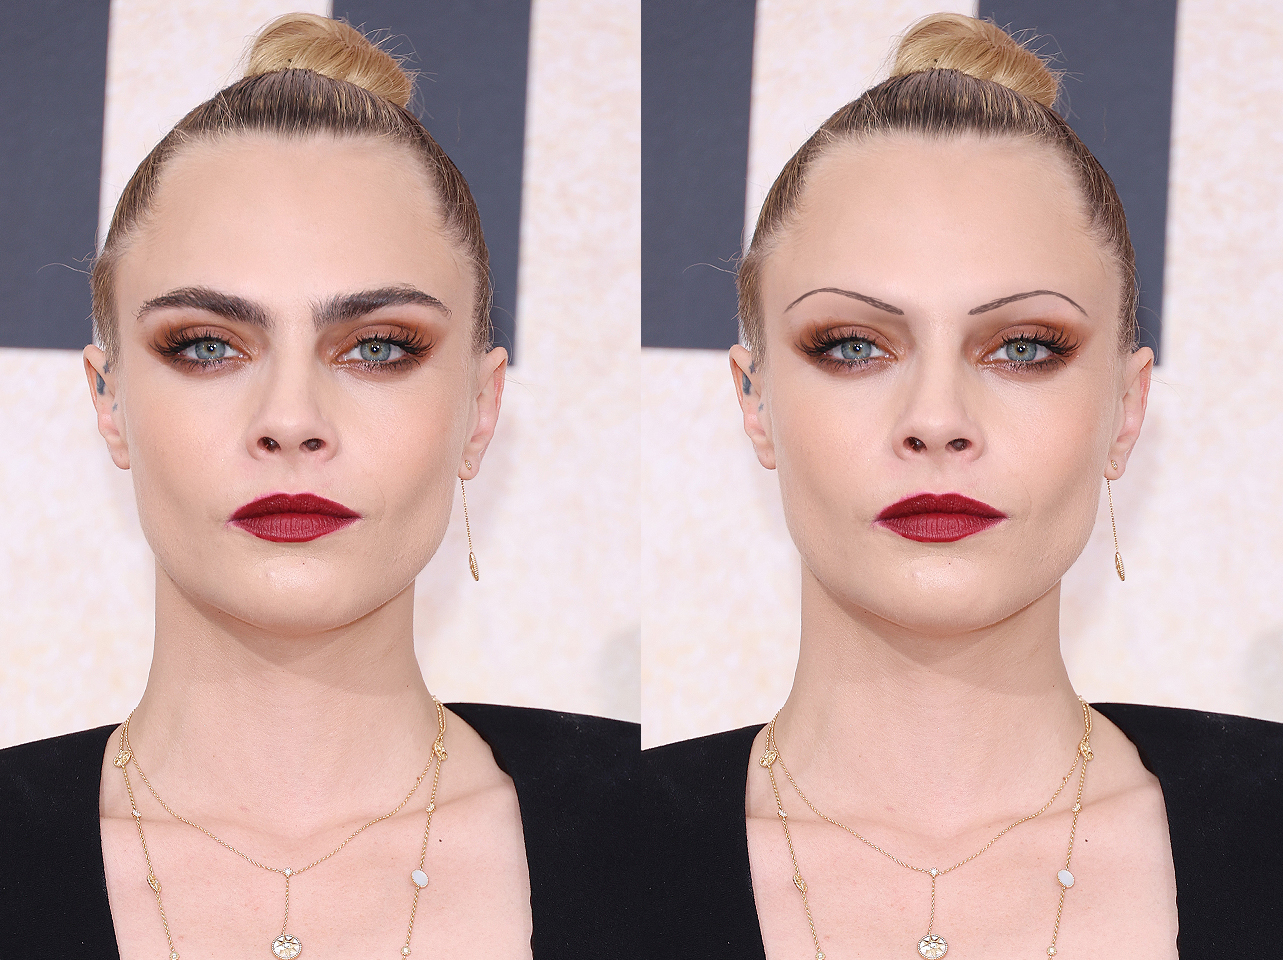 Cara Delevingne's signature brows from 2022 vs digitally edited thin-brow look | Source: Getty Images